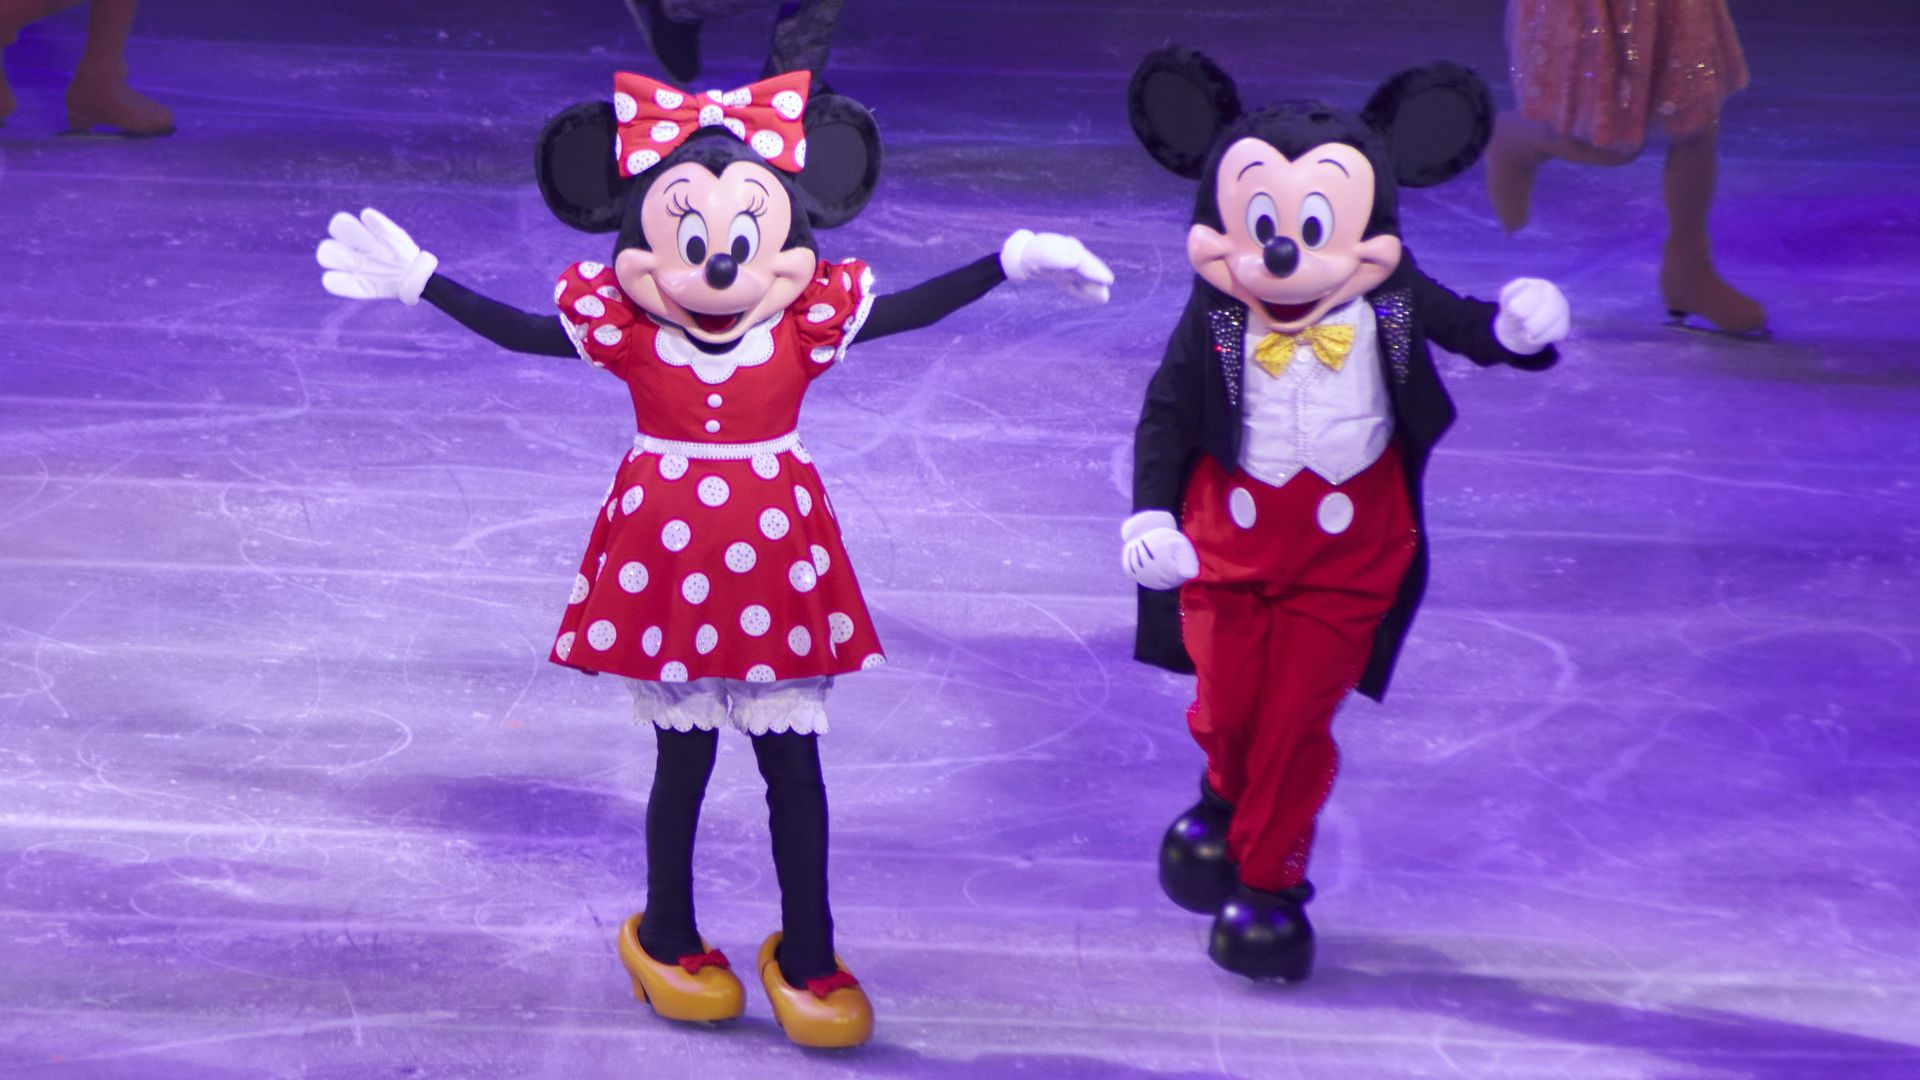 Minnie and Mickey Mouse characters skate during a Disney on Ice show. 